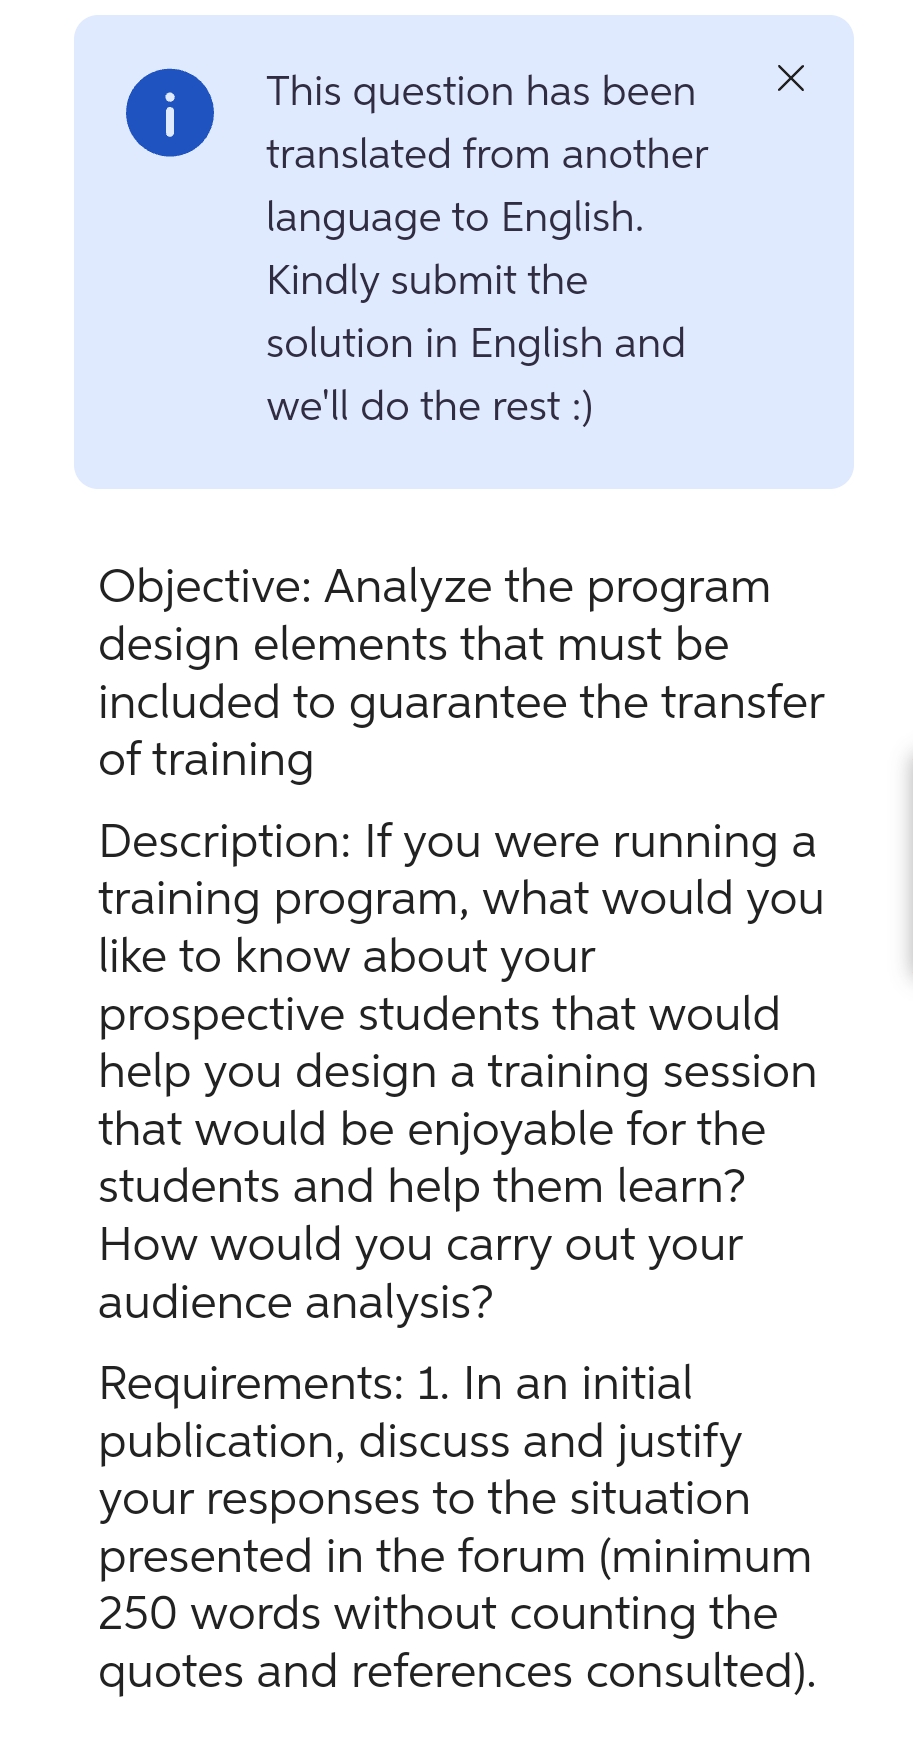 i
This question has been
translated from another
language to English.
Kindly submit the
solution in English and
we'll do the rest :)
X
Objective: Analyze the program
design elements that must be
included to guarantee the transfer
of training
Description: If you were running a
training program, what would you
like to know about your
prospective students that would
help you design a training session
that would be enjoyable for the
students and help them learn?
How would you carry out your
audience analysis?
Requirements: 1. In an initial
publication, discuss and justify
your responses to the situation
presented in the forum (minimum
250 words without counting the
quotes and references consulted).